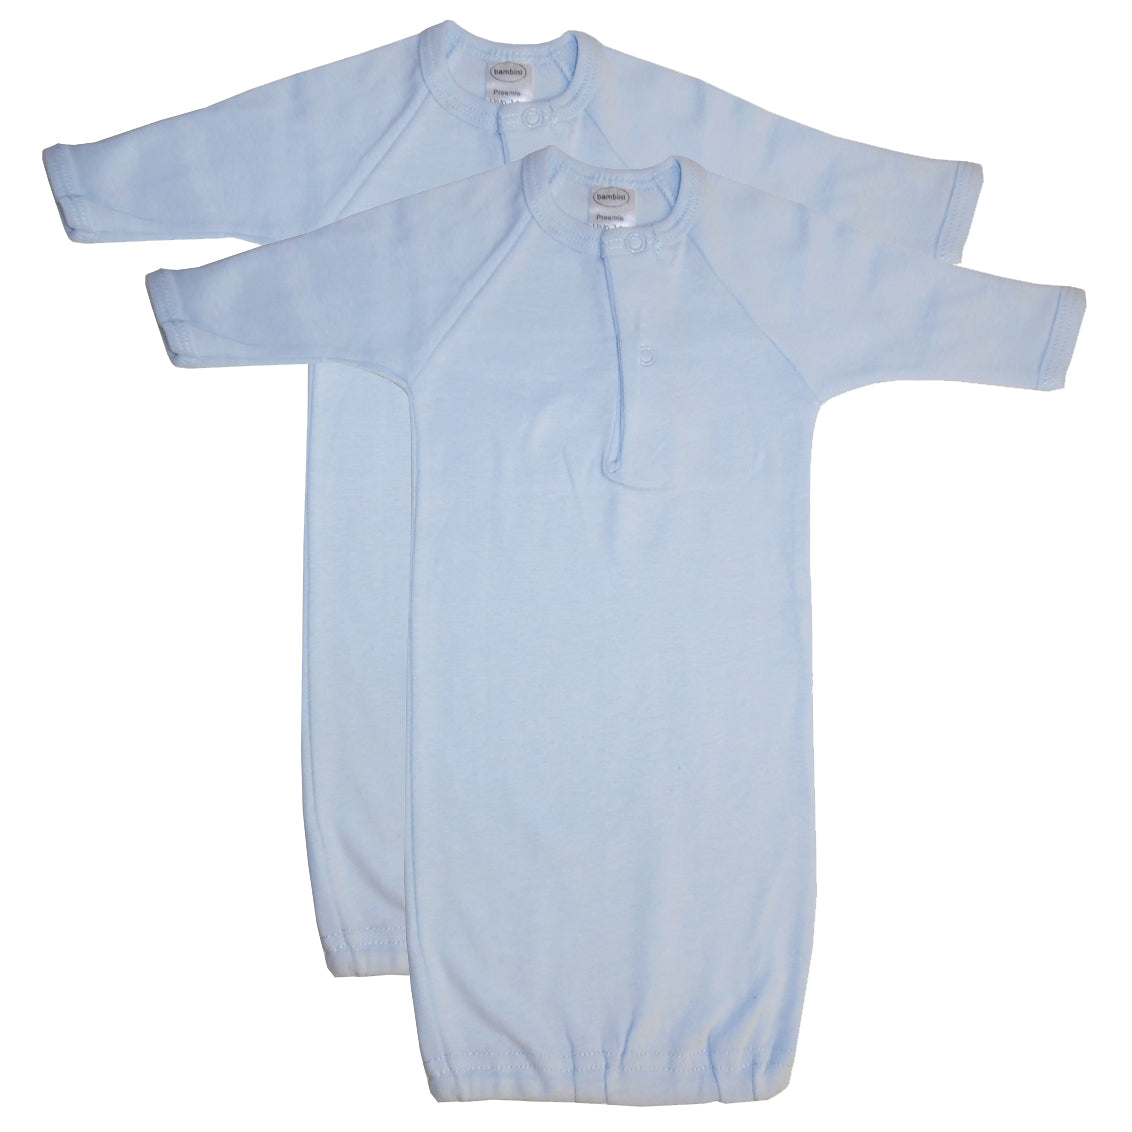 Bambini Boys Preemie Infant Gowns - 2 Pack